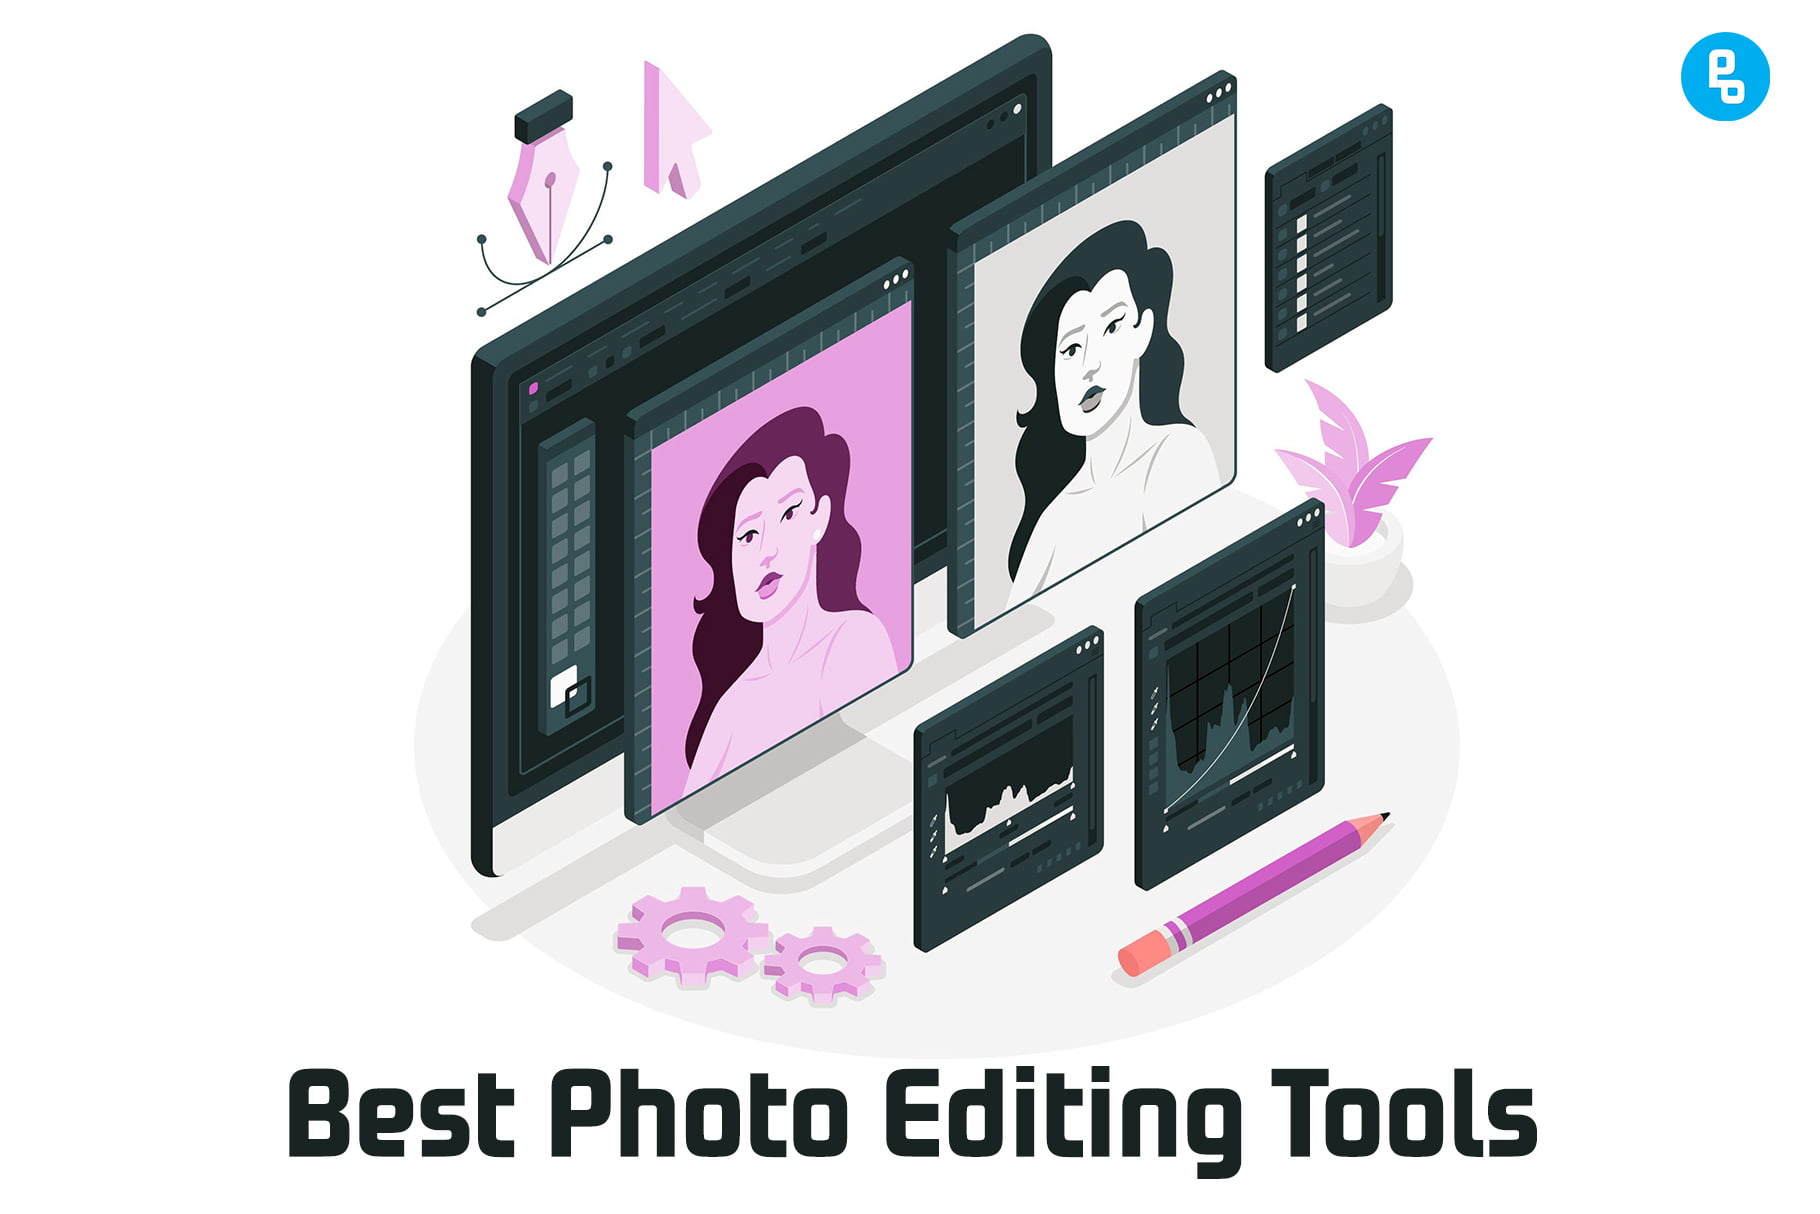 The best AI photo editing tools will make it easy to edit your photos without any experience. They will also offer a variety of features that will help you learn how to use the program effectively.